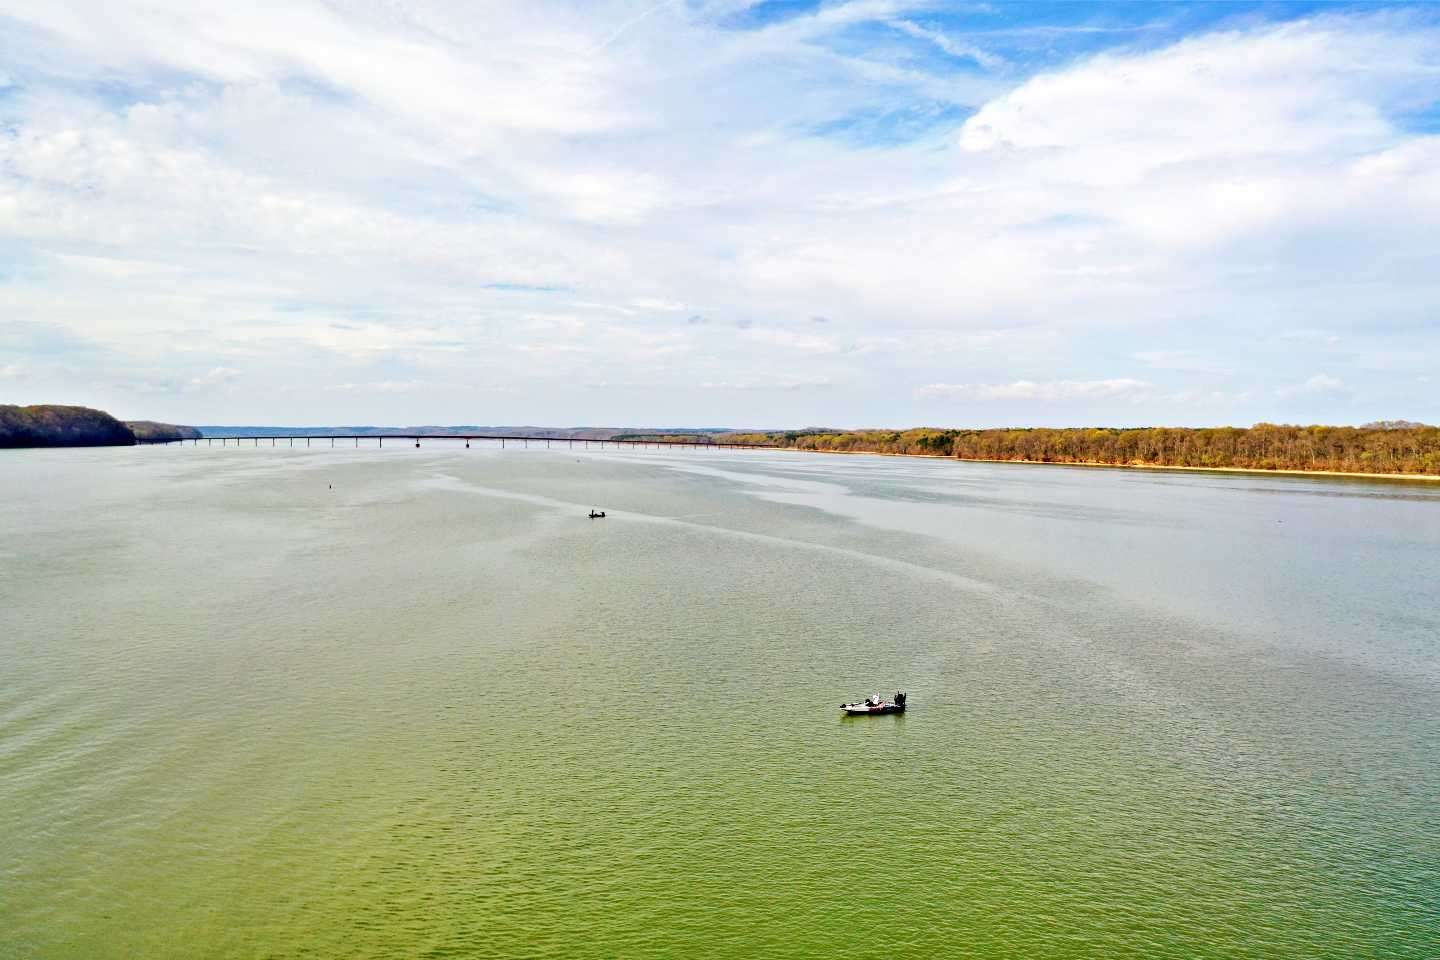 The Guaranteed Rate Bassmaster Elite at Pickwick Lake begins on Thursday, with a lot of weather changes to come. This tranquil scene will turn ugly on Wednesday, as a major storm system packing heavy rain with the potential for tornados crosses the Tennessee River valley in northern Alabama. 
<br><br>
<em>All captions: Craig Lamb</em>